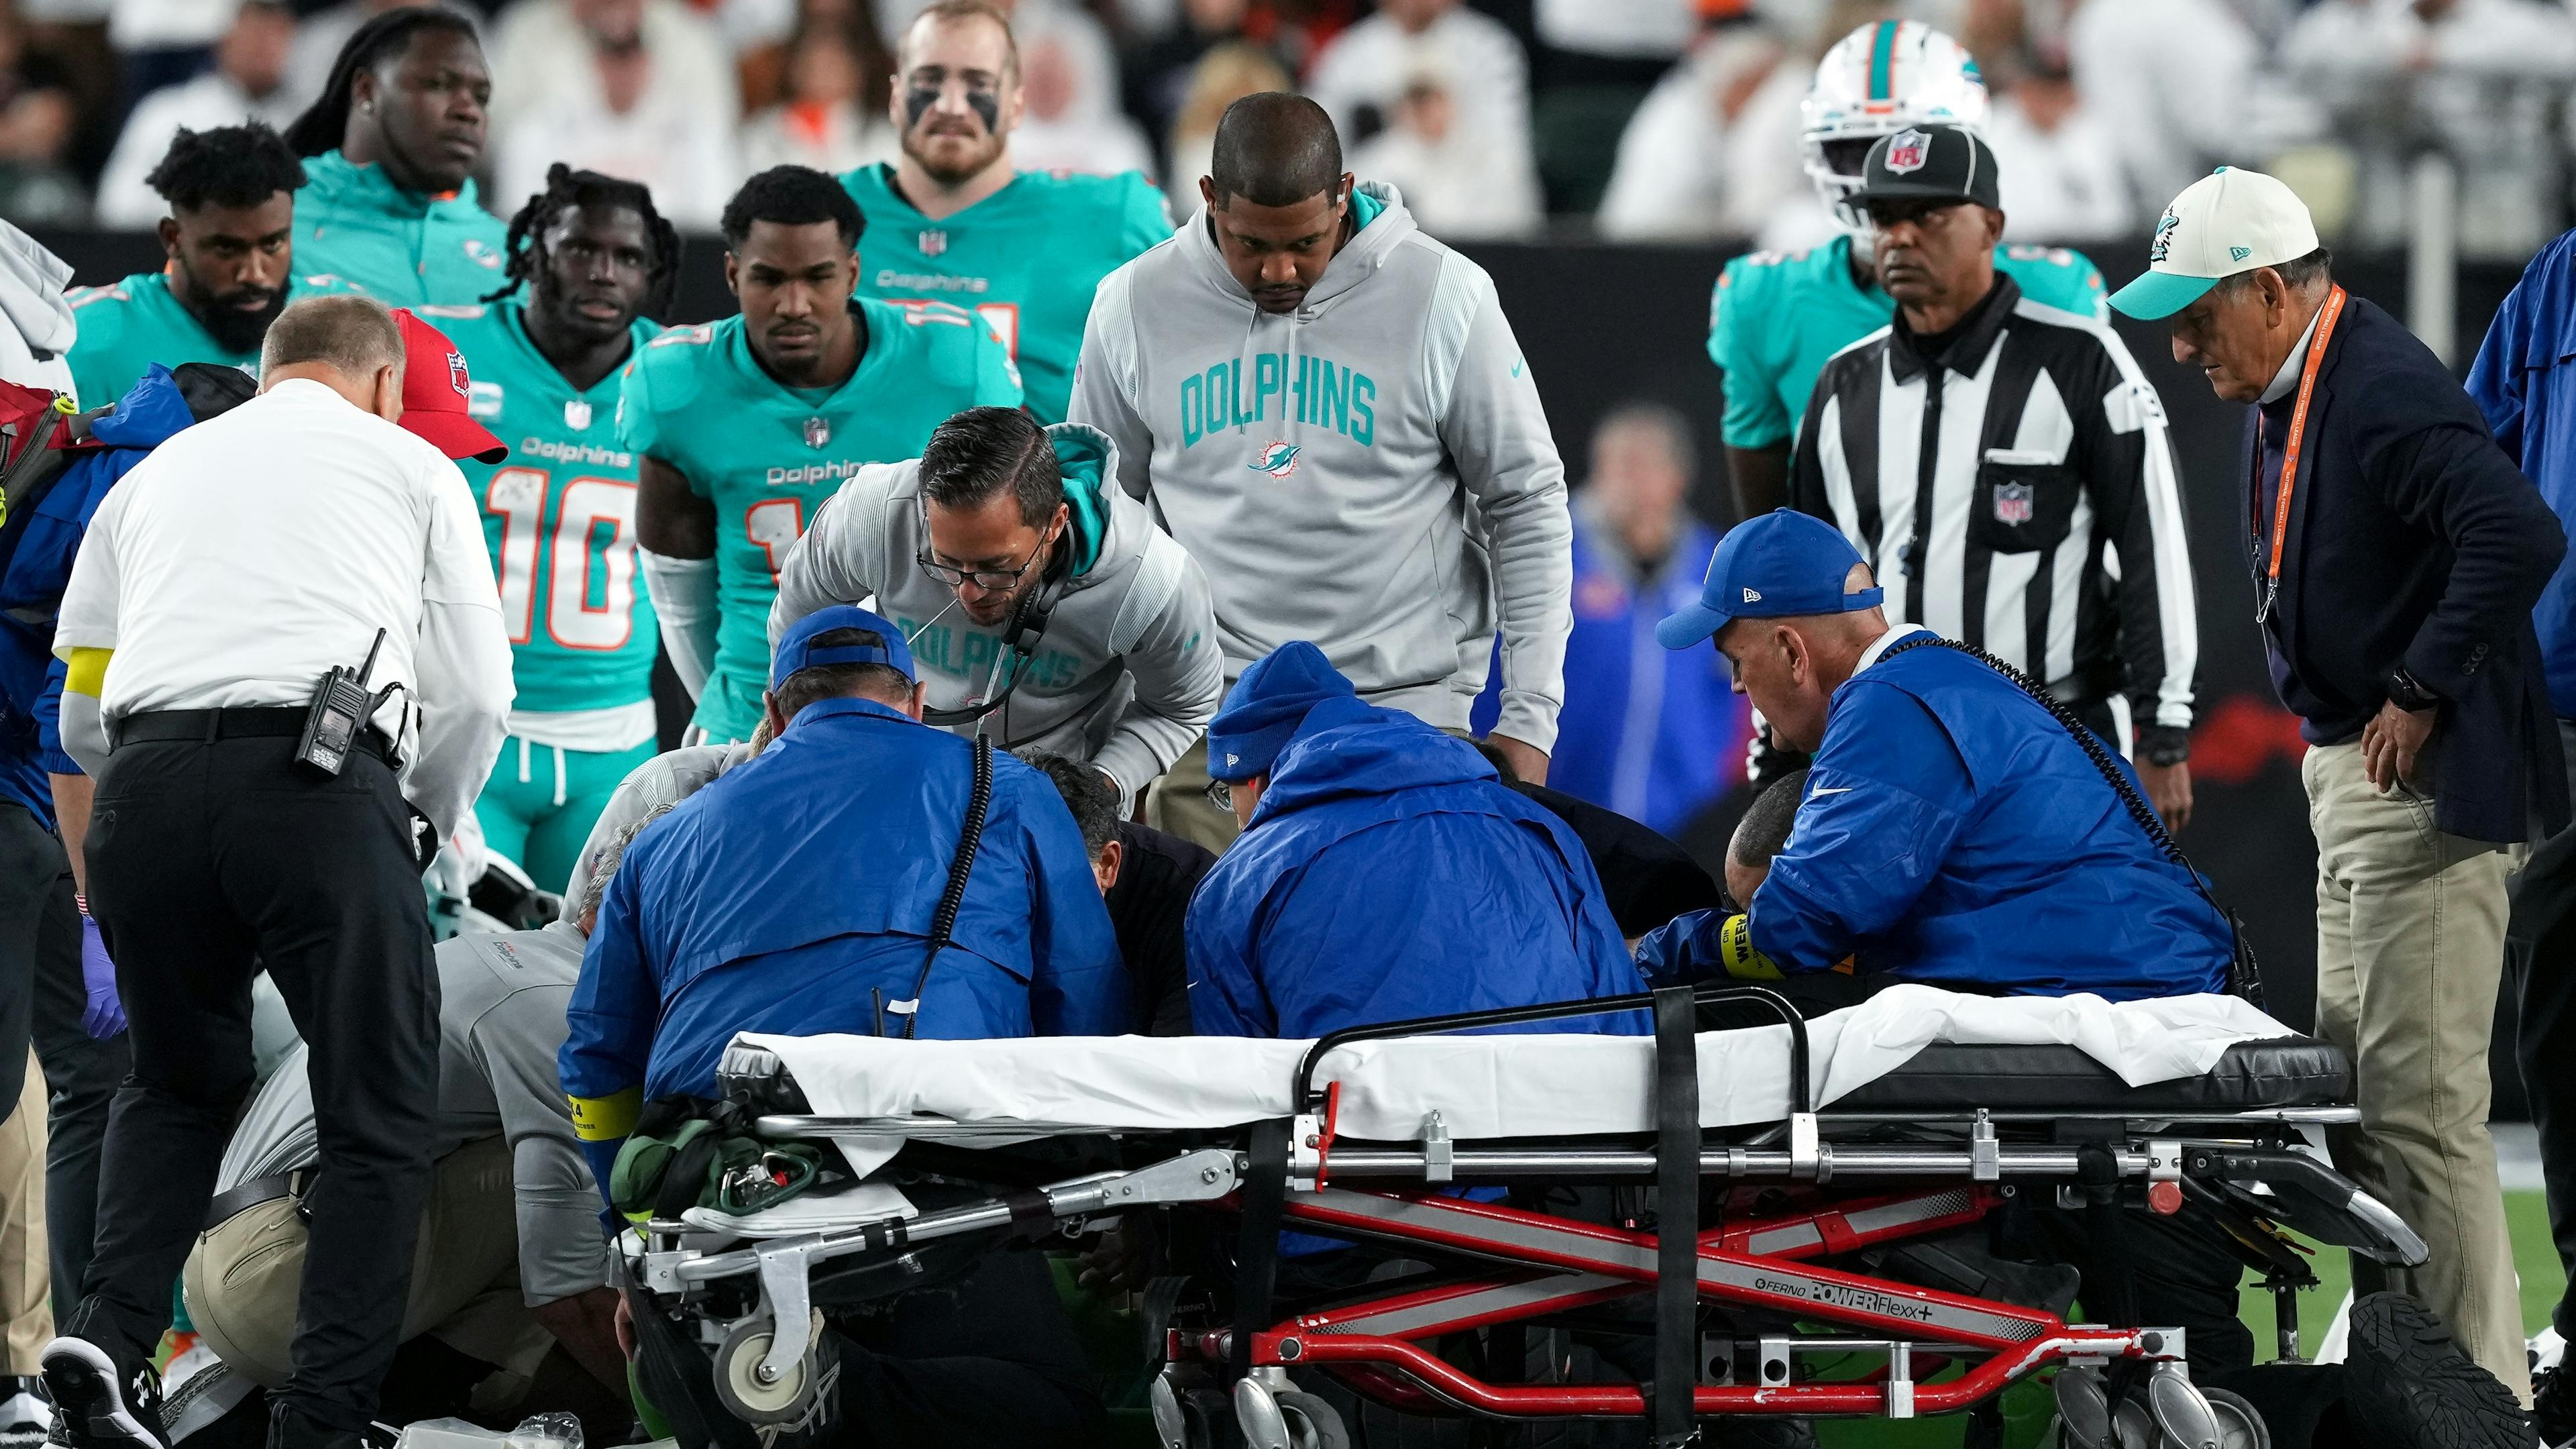 Dolphin's quarterback seeking medical attention on the field